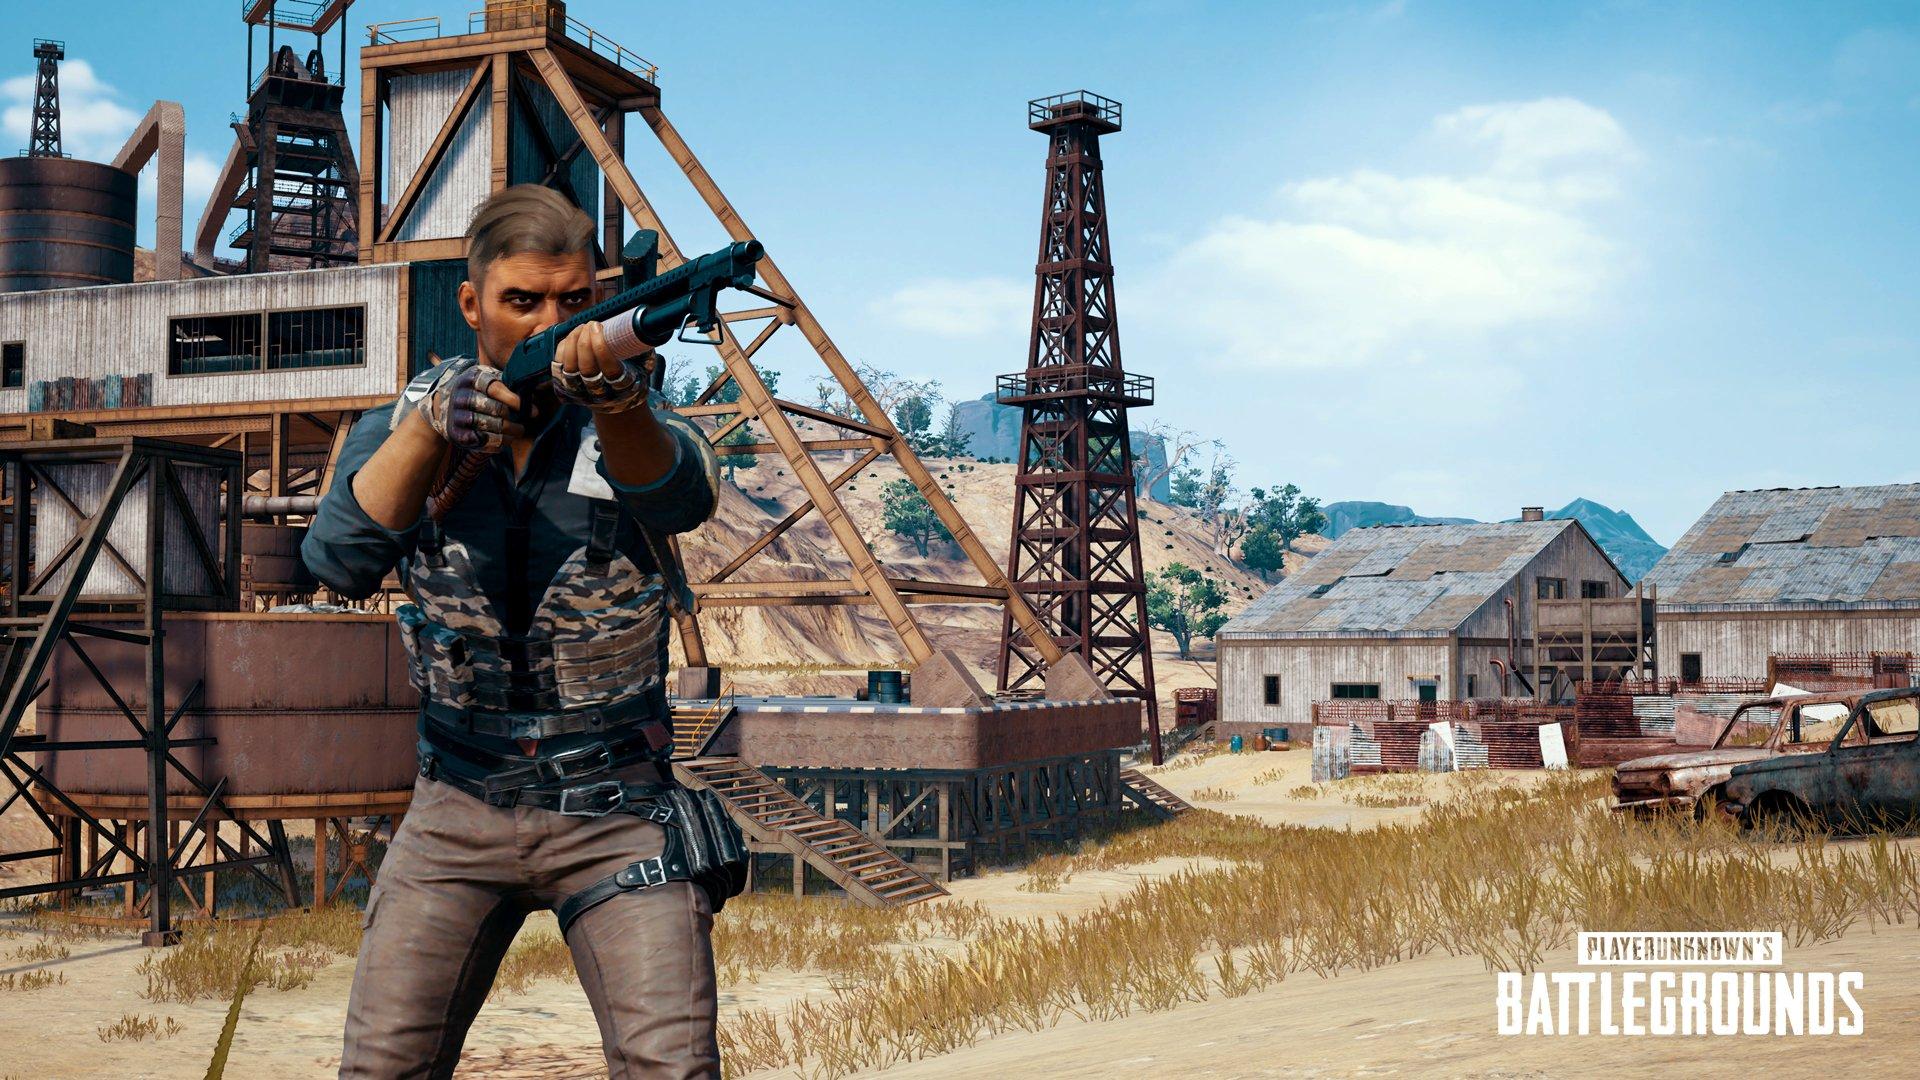 Until map selection is added, PUBG players are taking it upon